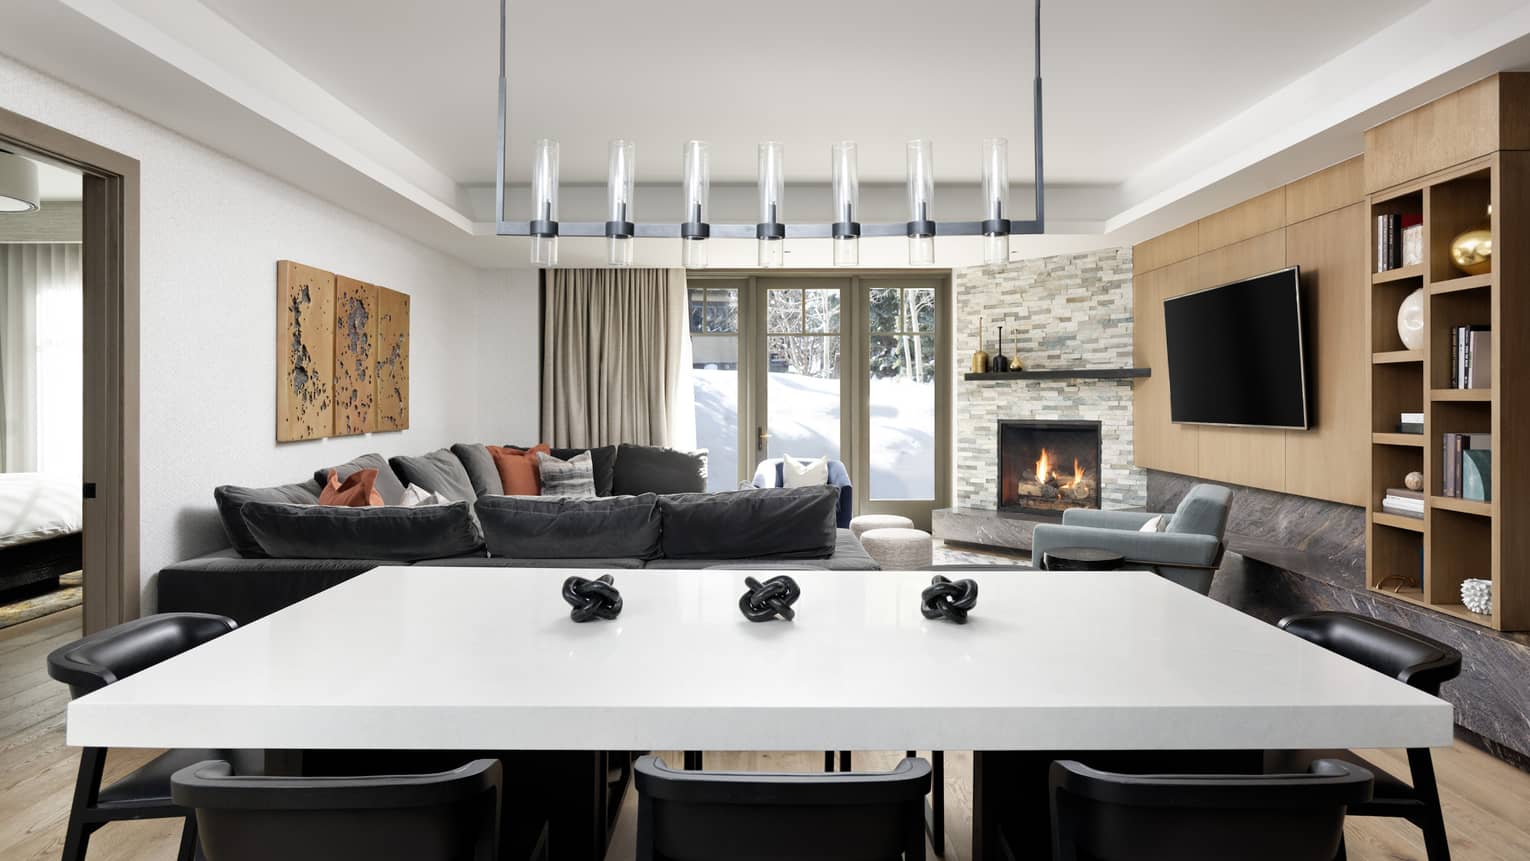 White-topped dining table, 8 black chairs, modern lantern-like lighting fixture